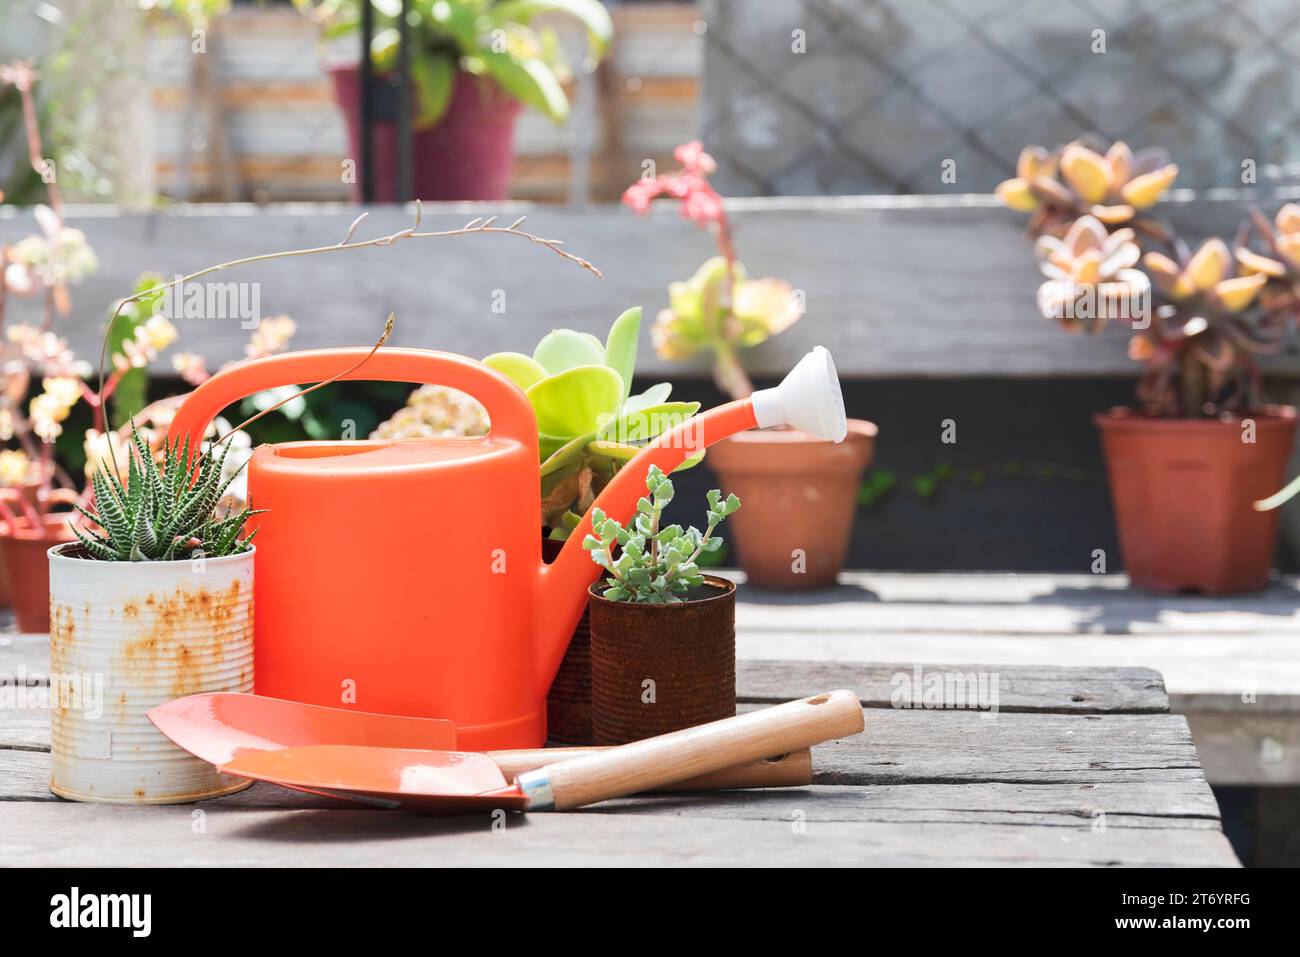 Front view watering can wooden tabl Stock Photo